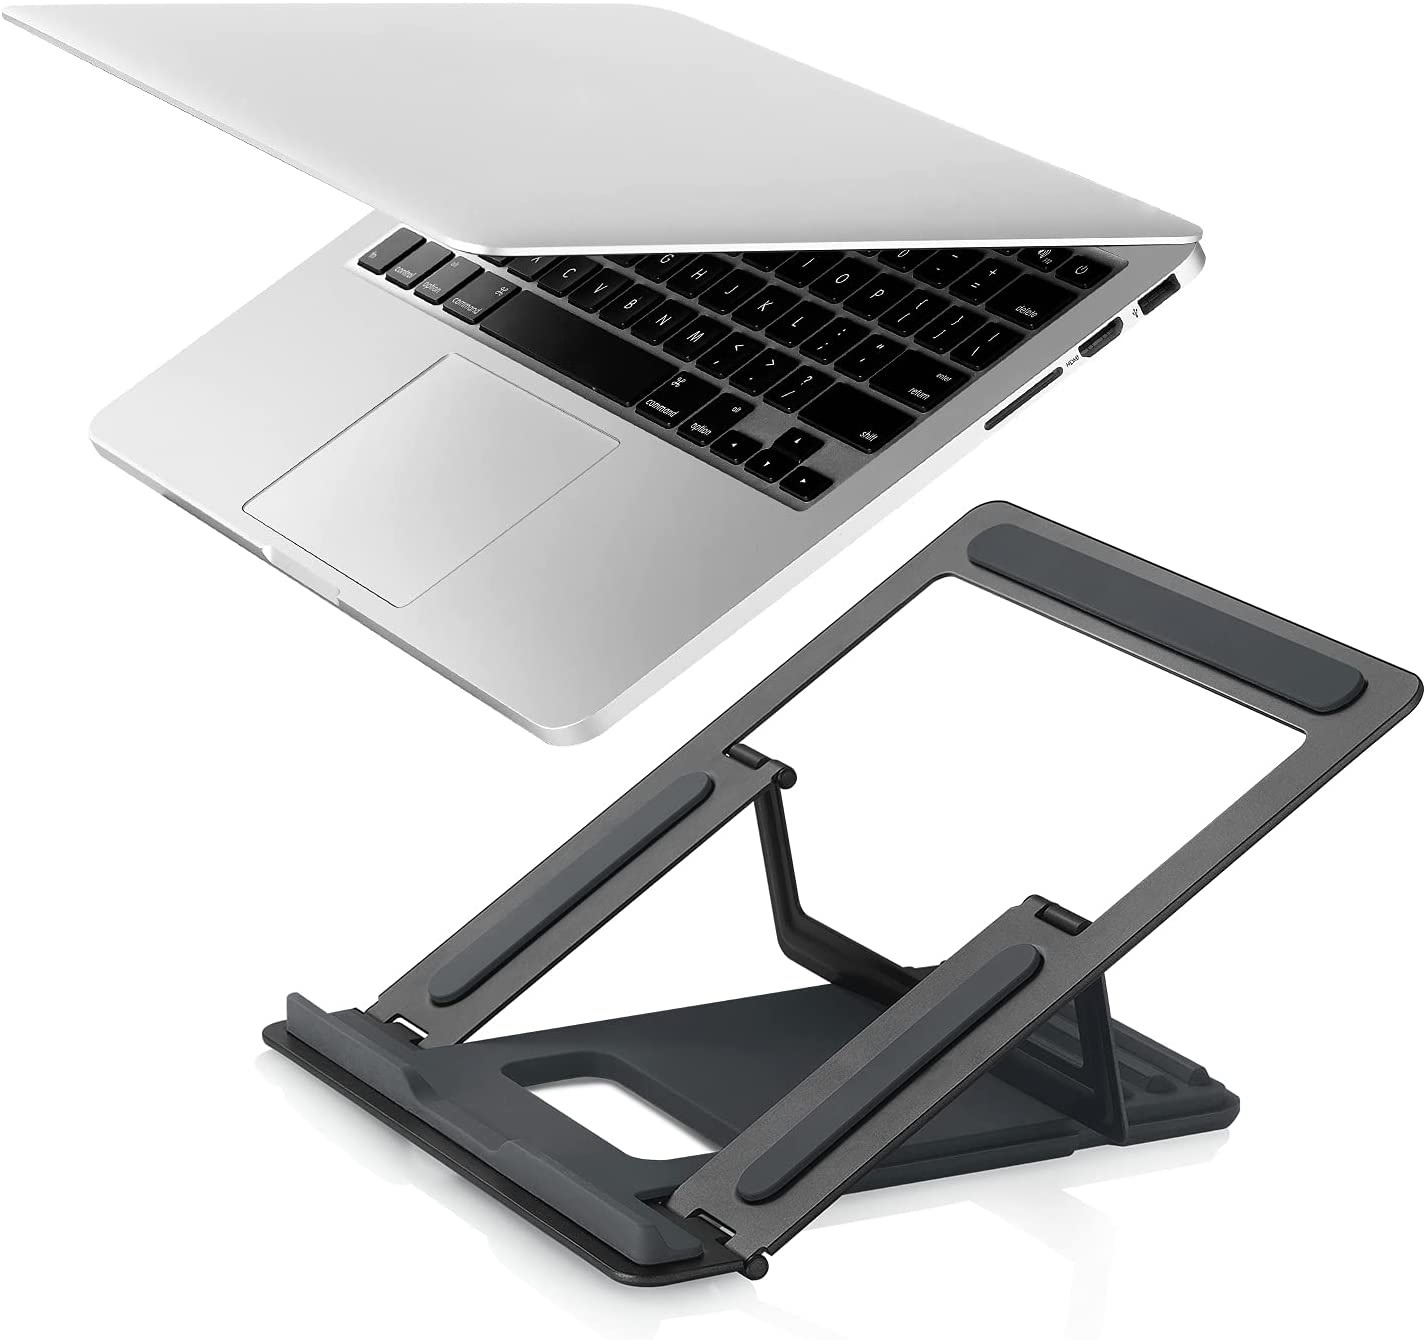 motor Handel haspel SSS-T8 Foldable Stand for Laptop / Notebook | PEPPER JOBS EU - Official  authorized EU Distributor of PEPPER JOBS products Digital Signage Kiosk  players X28-i and X99-i